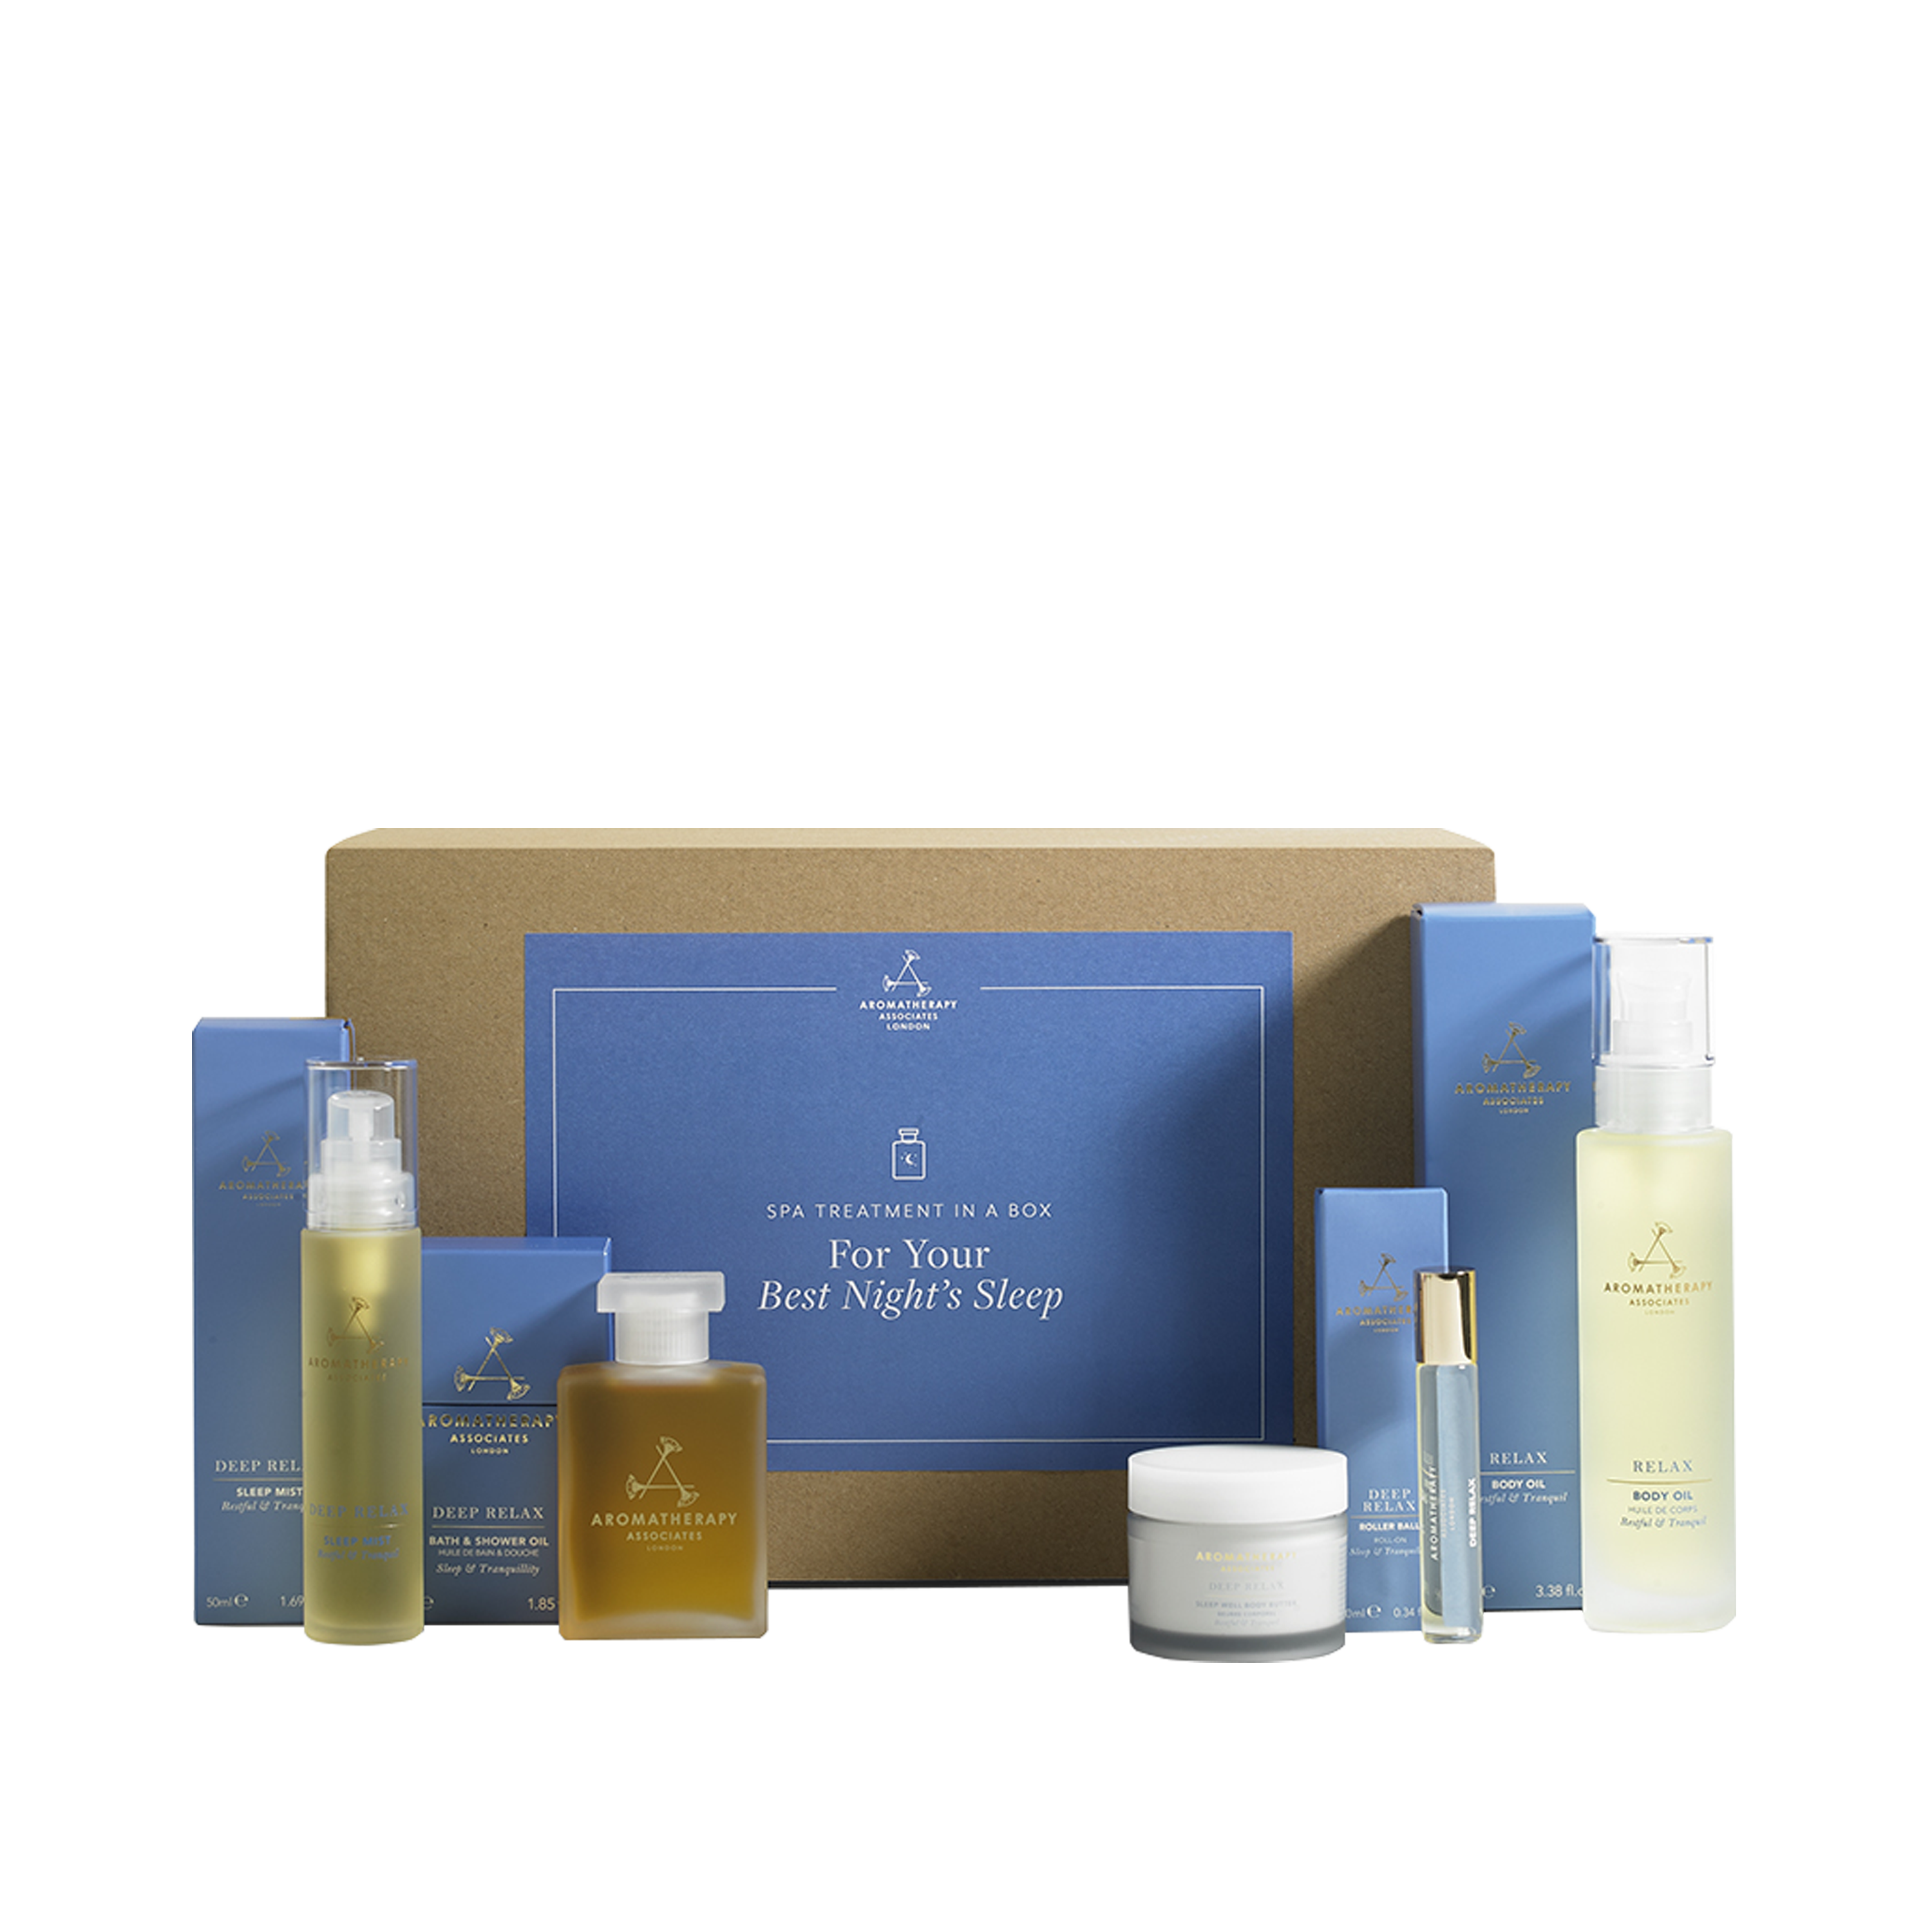 Spa Treatment In A Box - For Your Best Night's Sleep